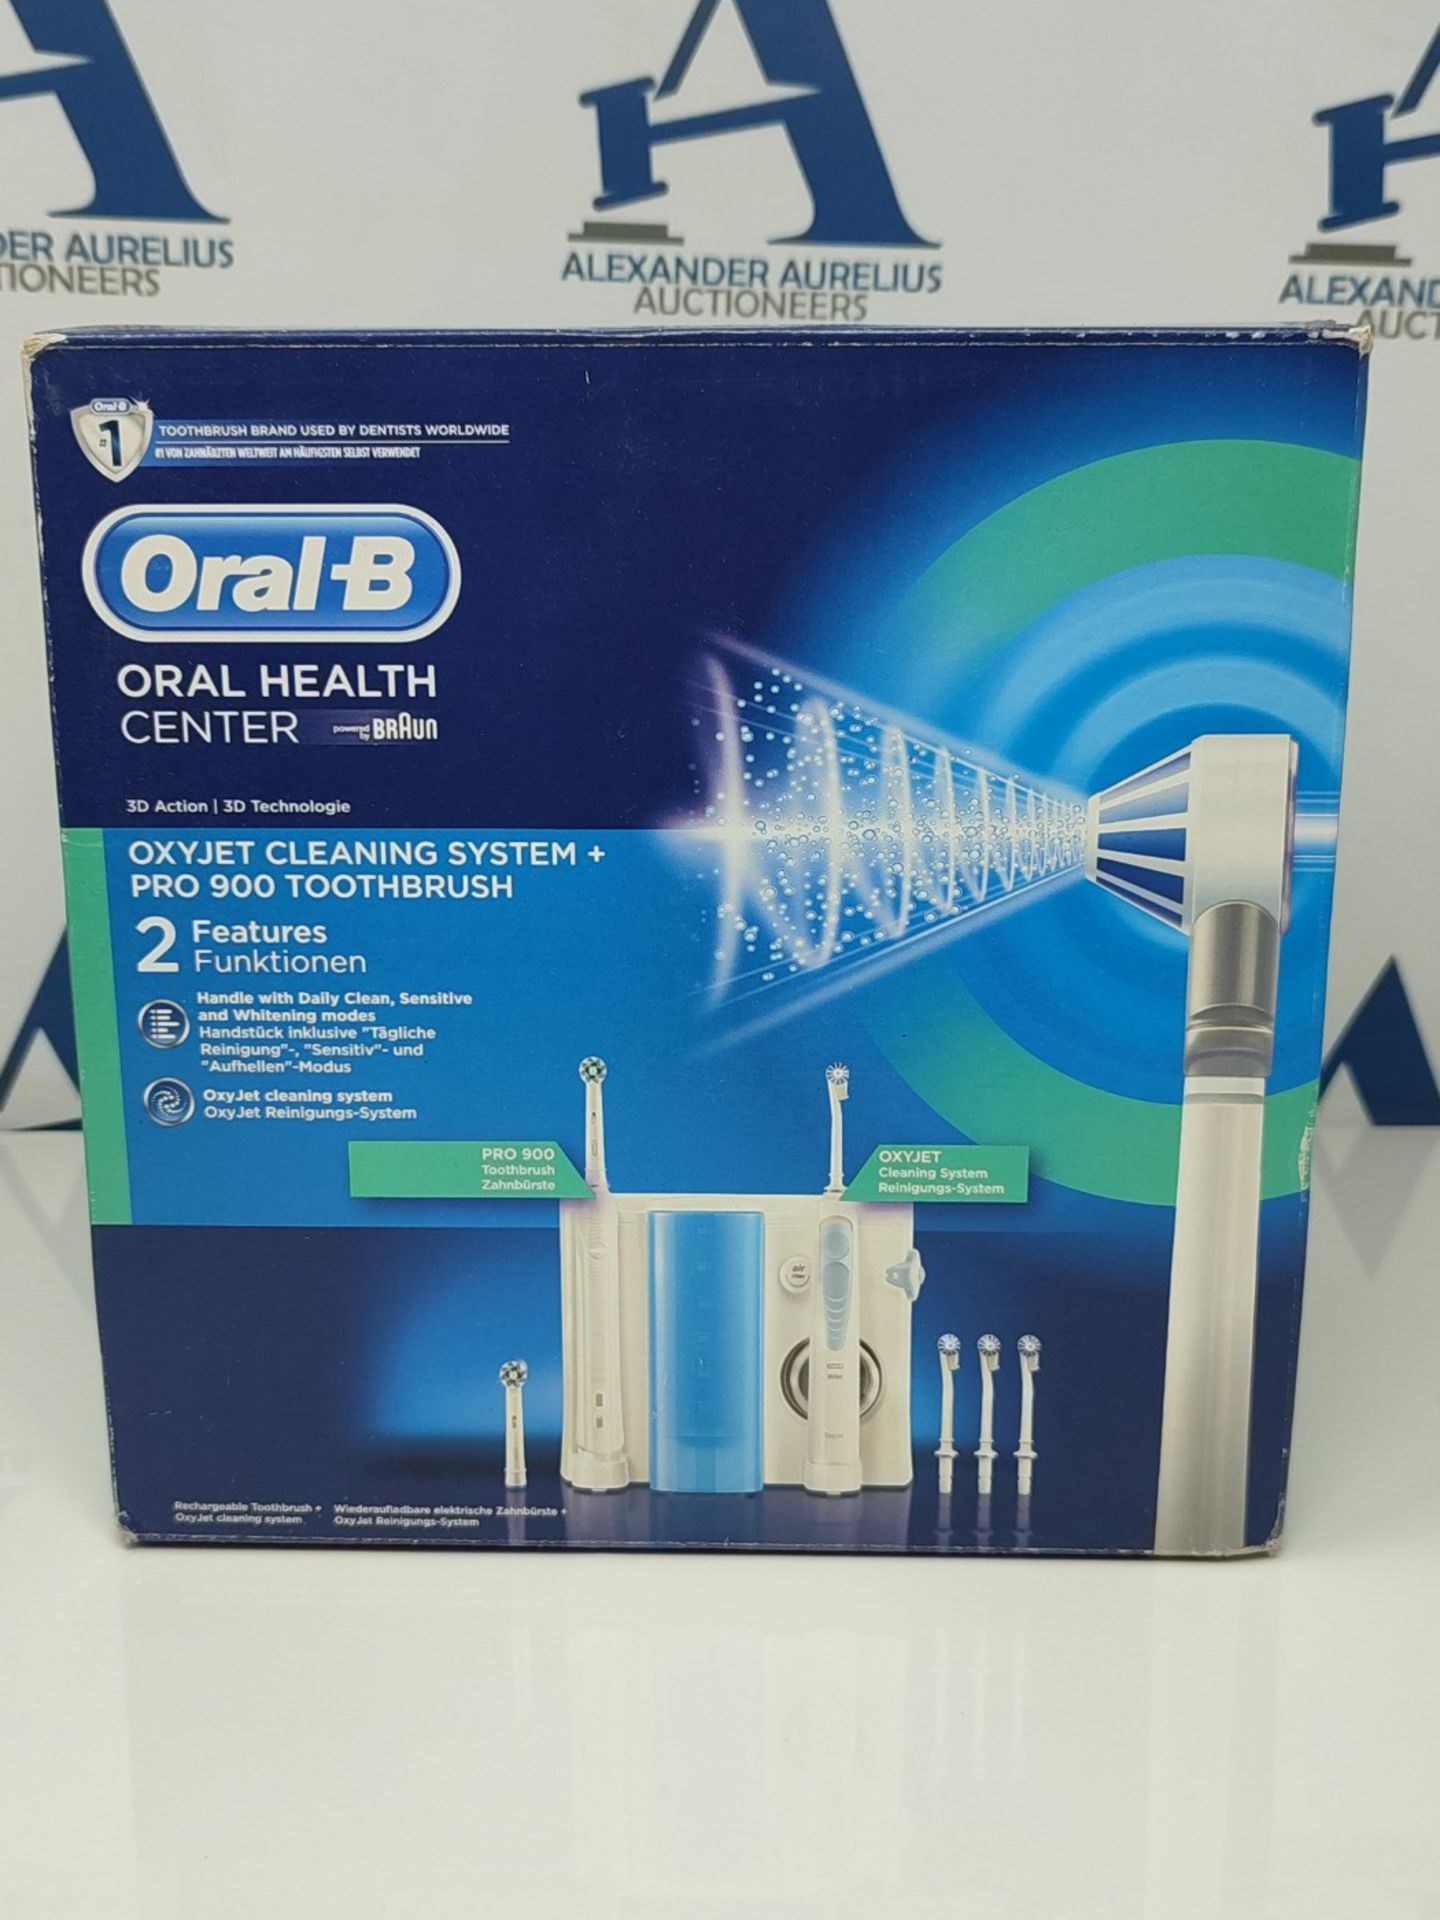 RRP £109.00 Oral-B Oral Health Center Oxyjet Cleaning System + Pro 900 Toothbrush - Bild 2 aus 3